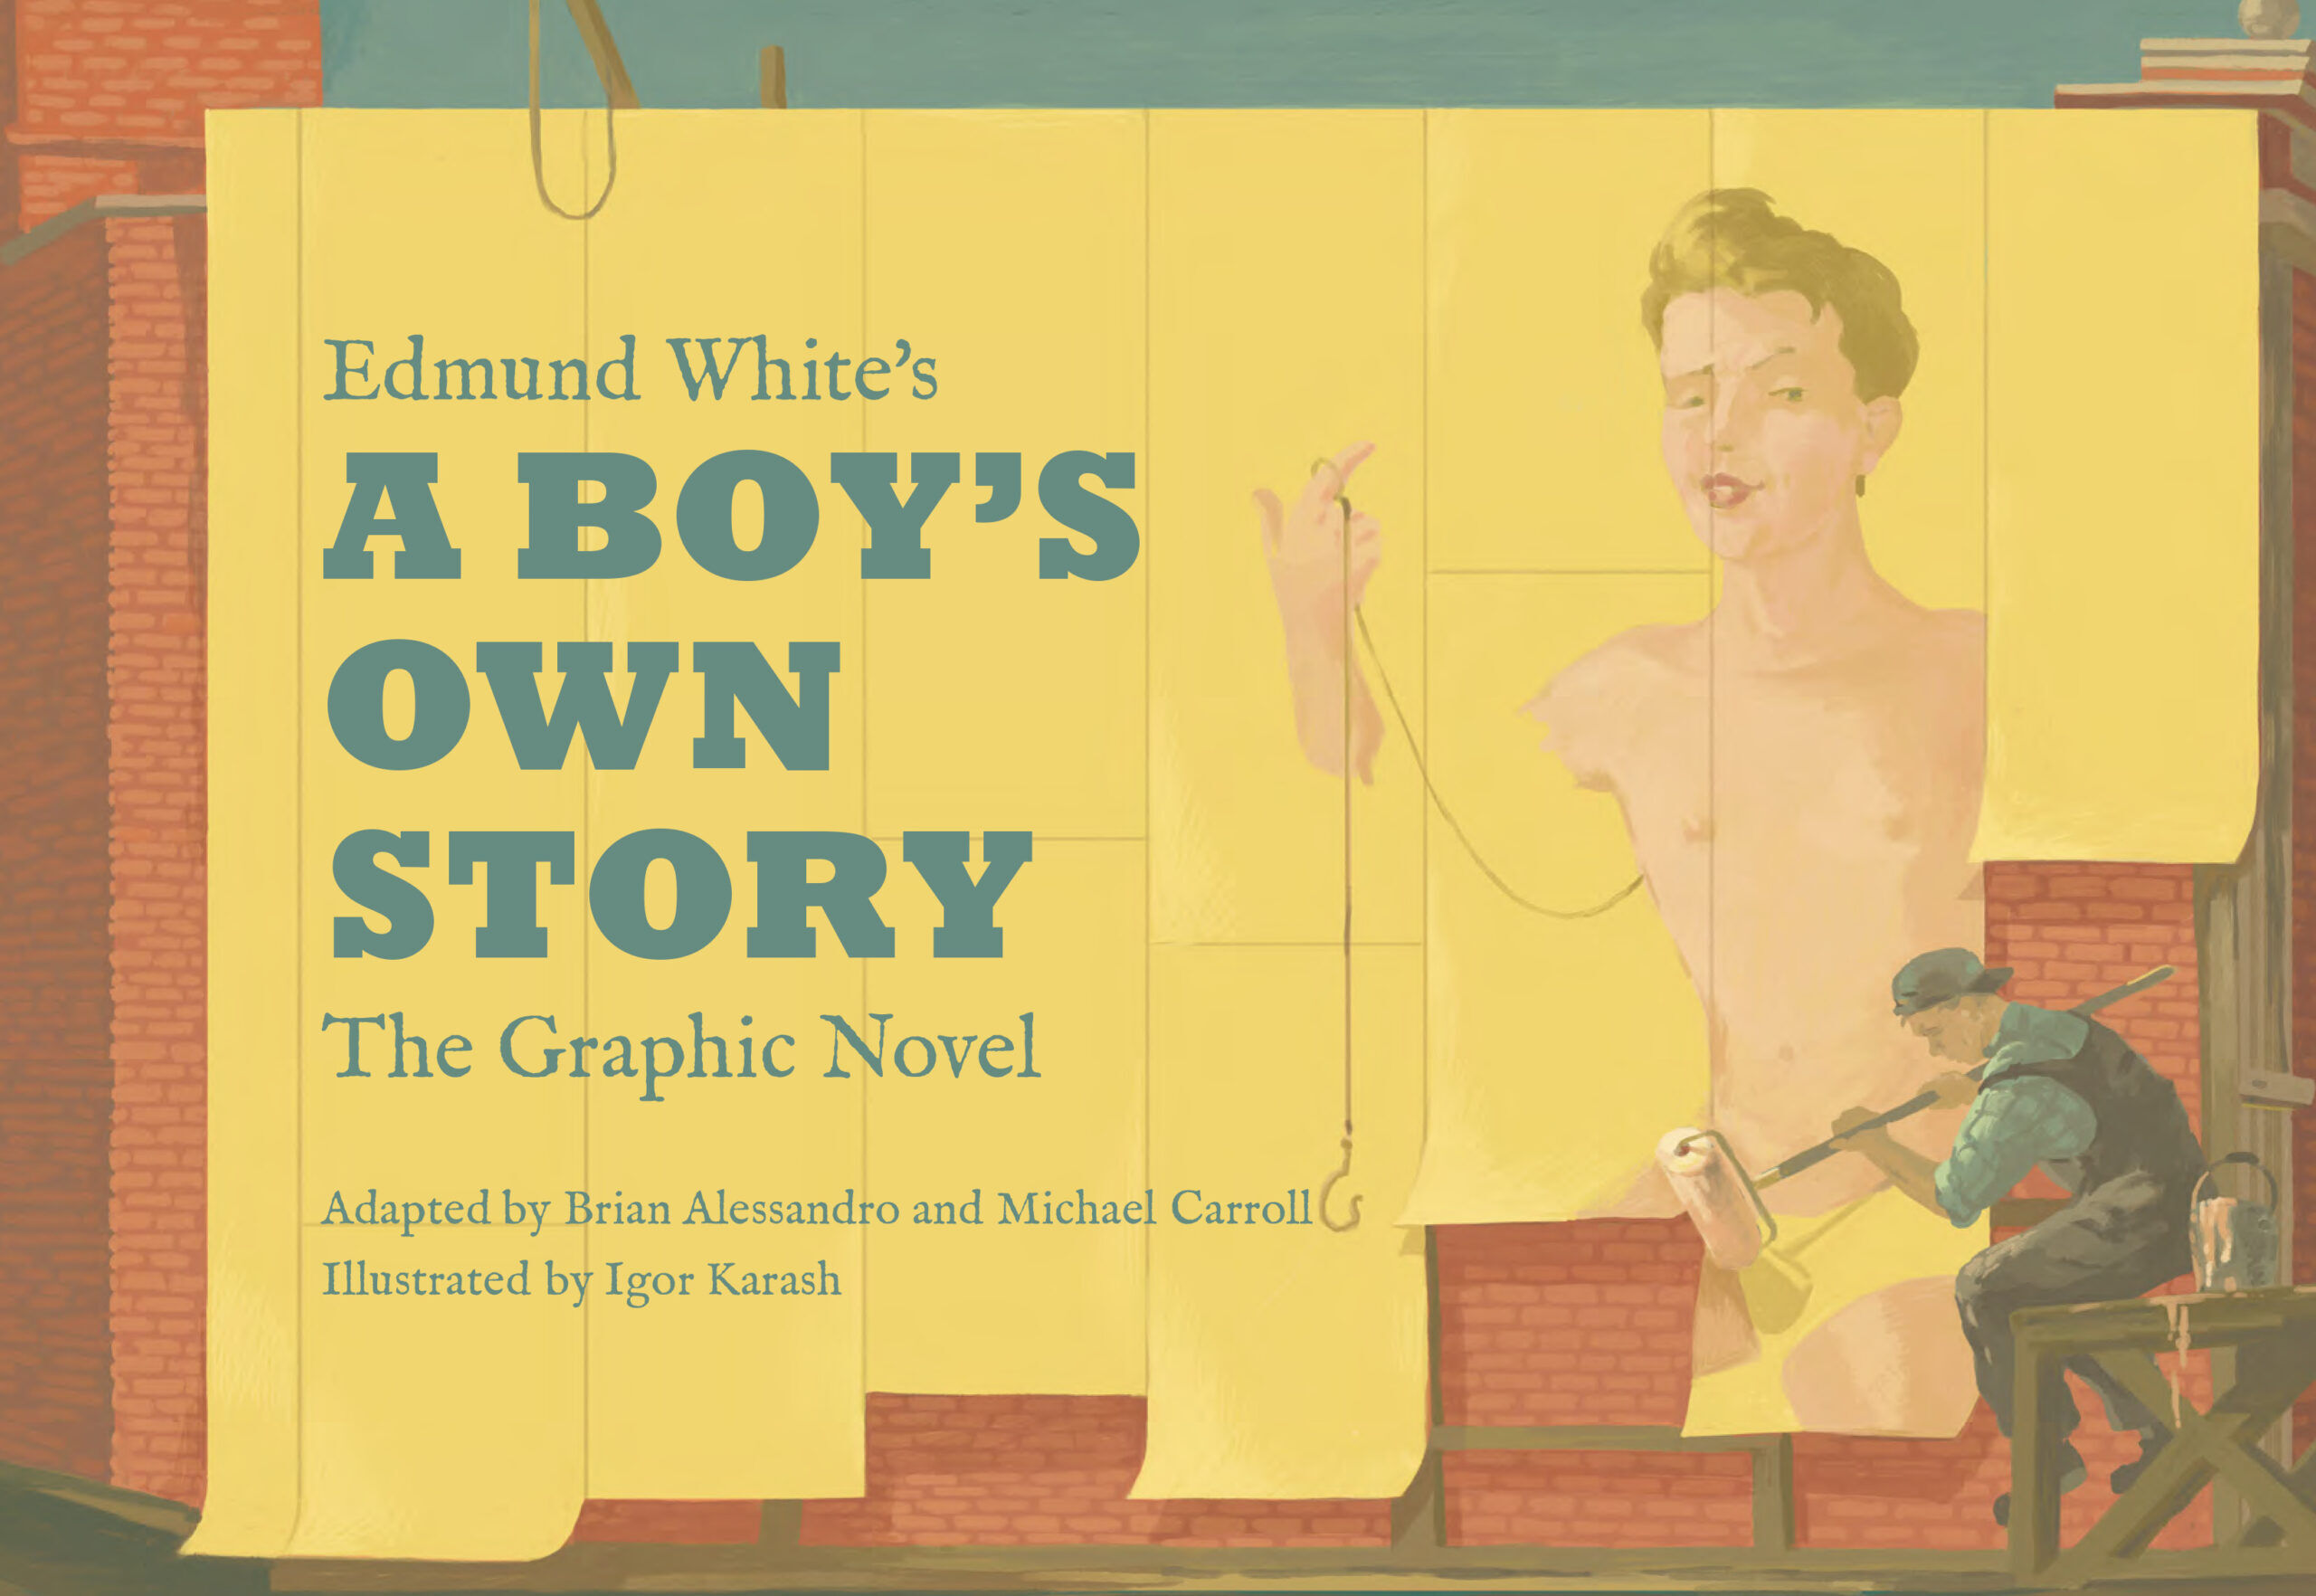 Edmund White&#8217;s A Boy&#8217;s Own Story has been adapted as a graphic novel &#038; we have an exclusive excerpt